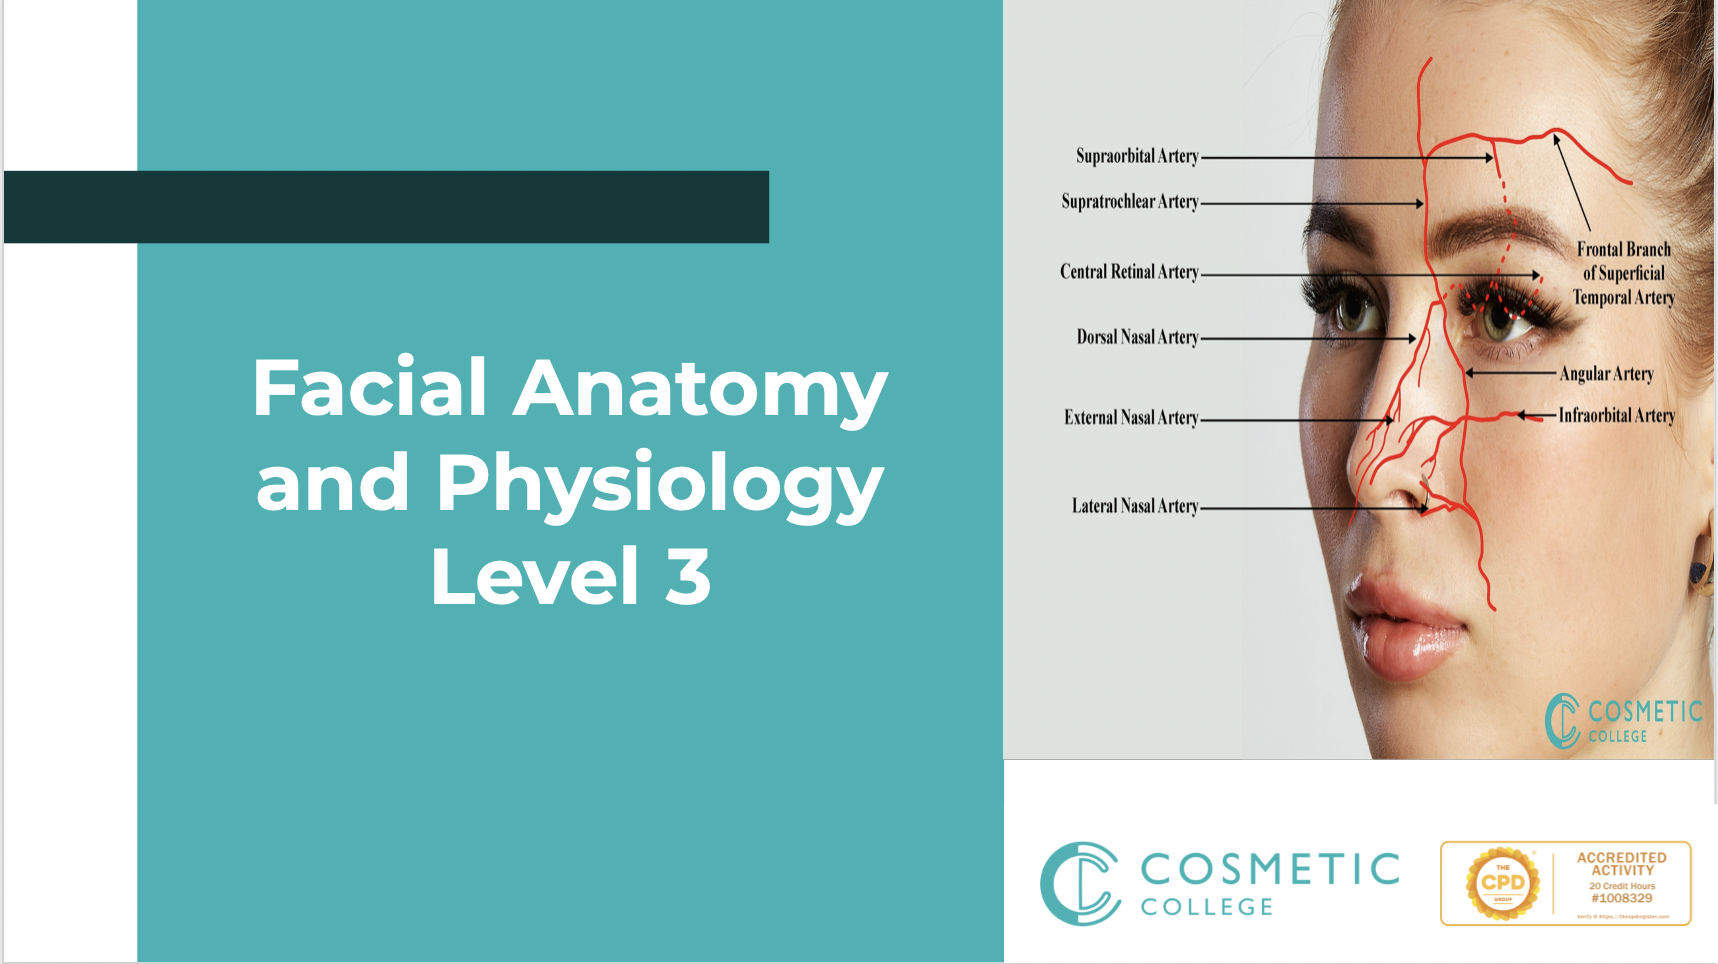 Facial Anatomy and Physiology Training Course